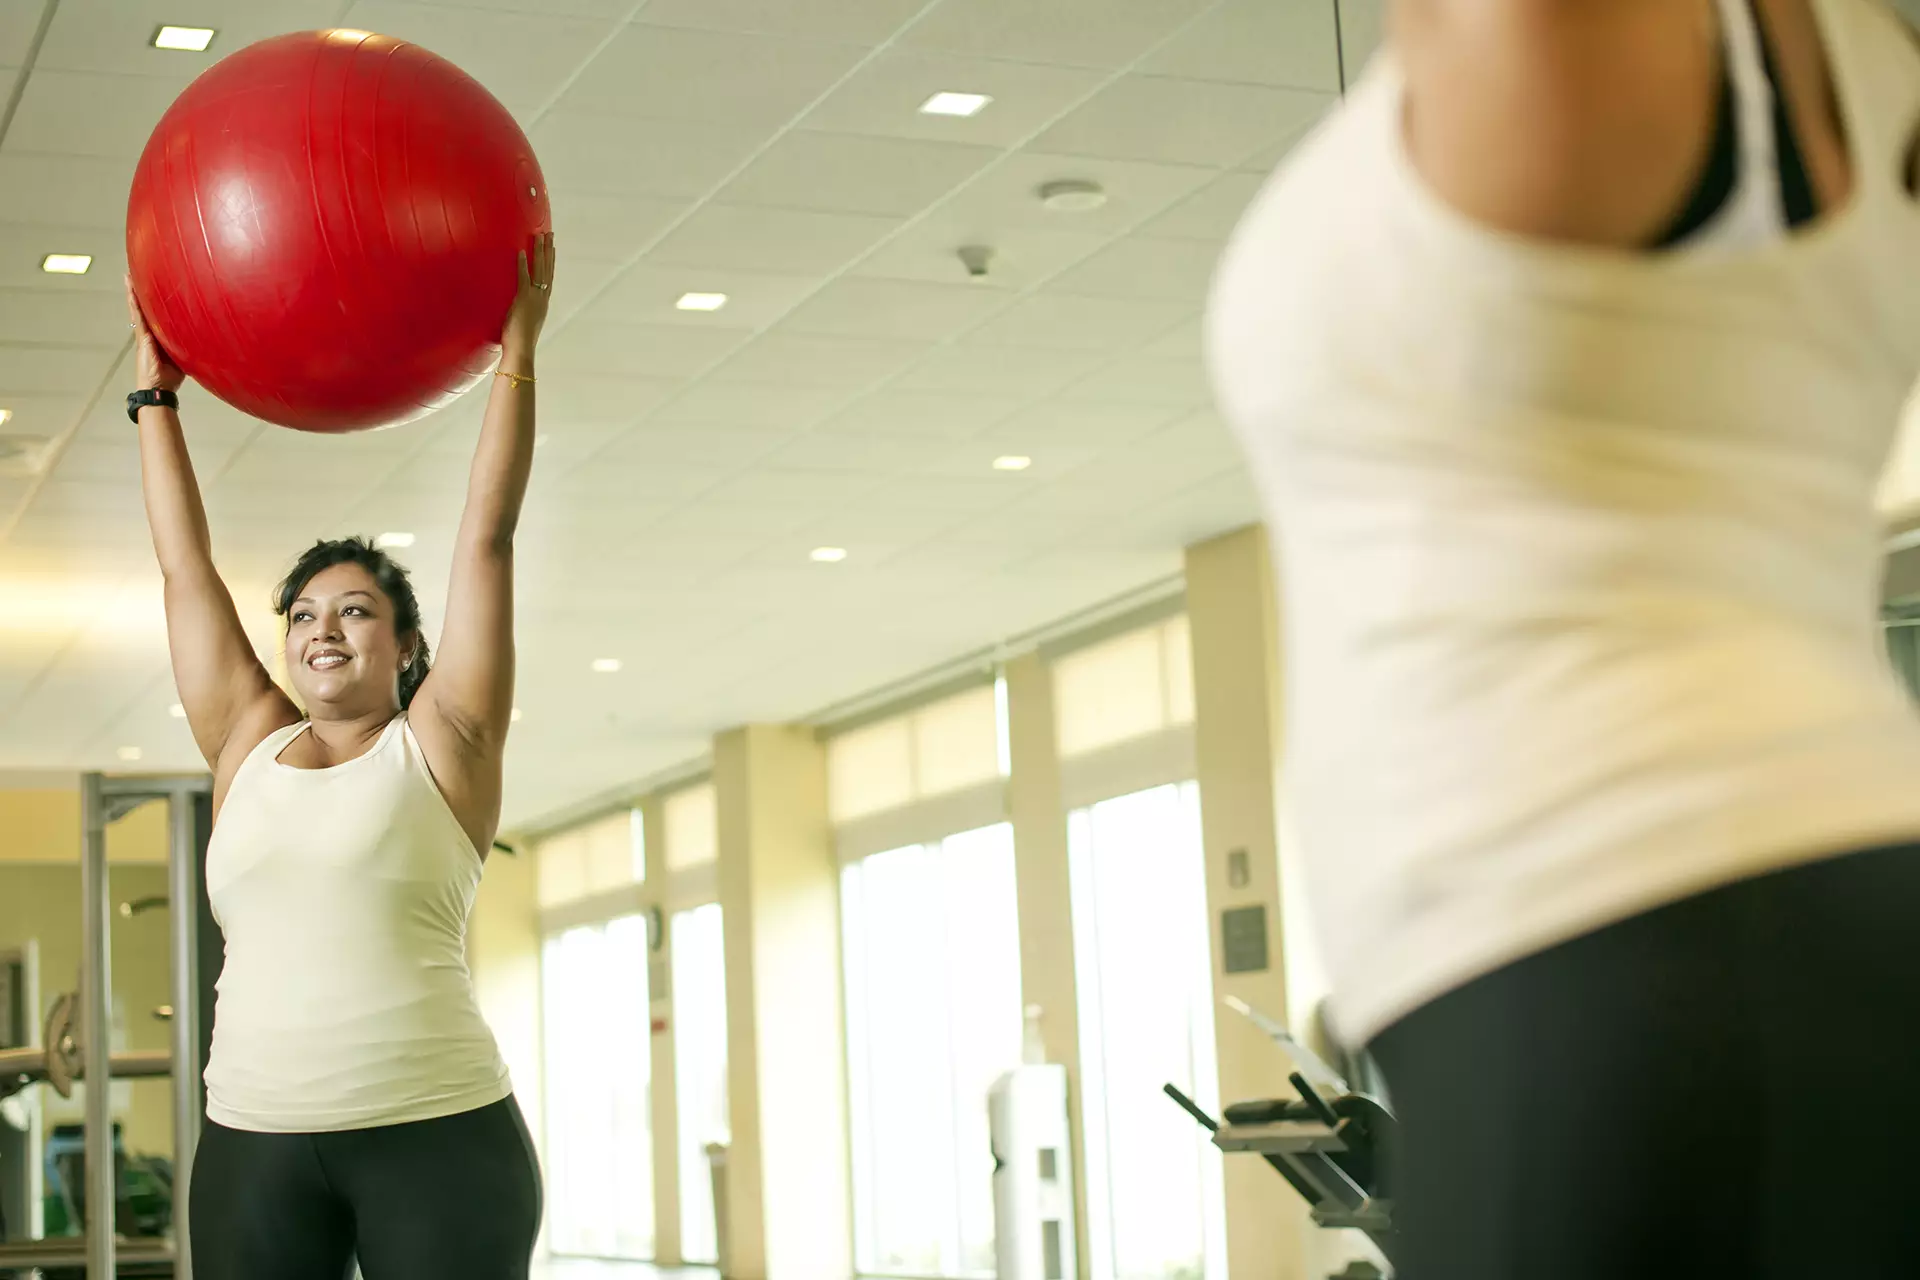 Woman in gym looking into mirror while holding exercise ball